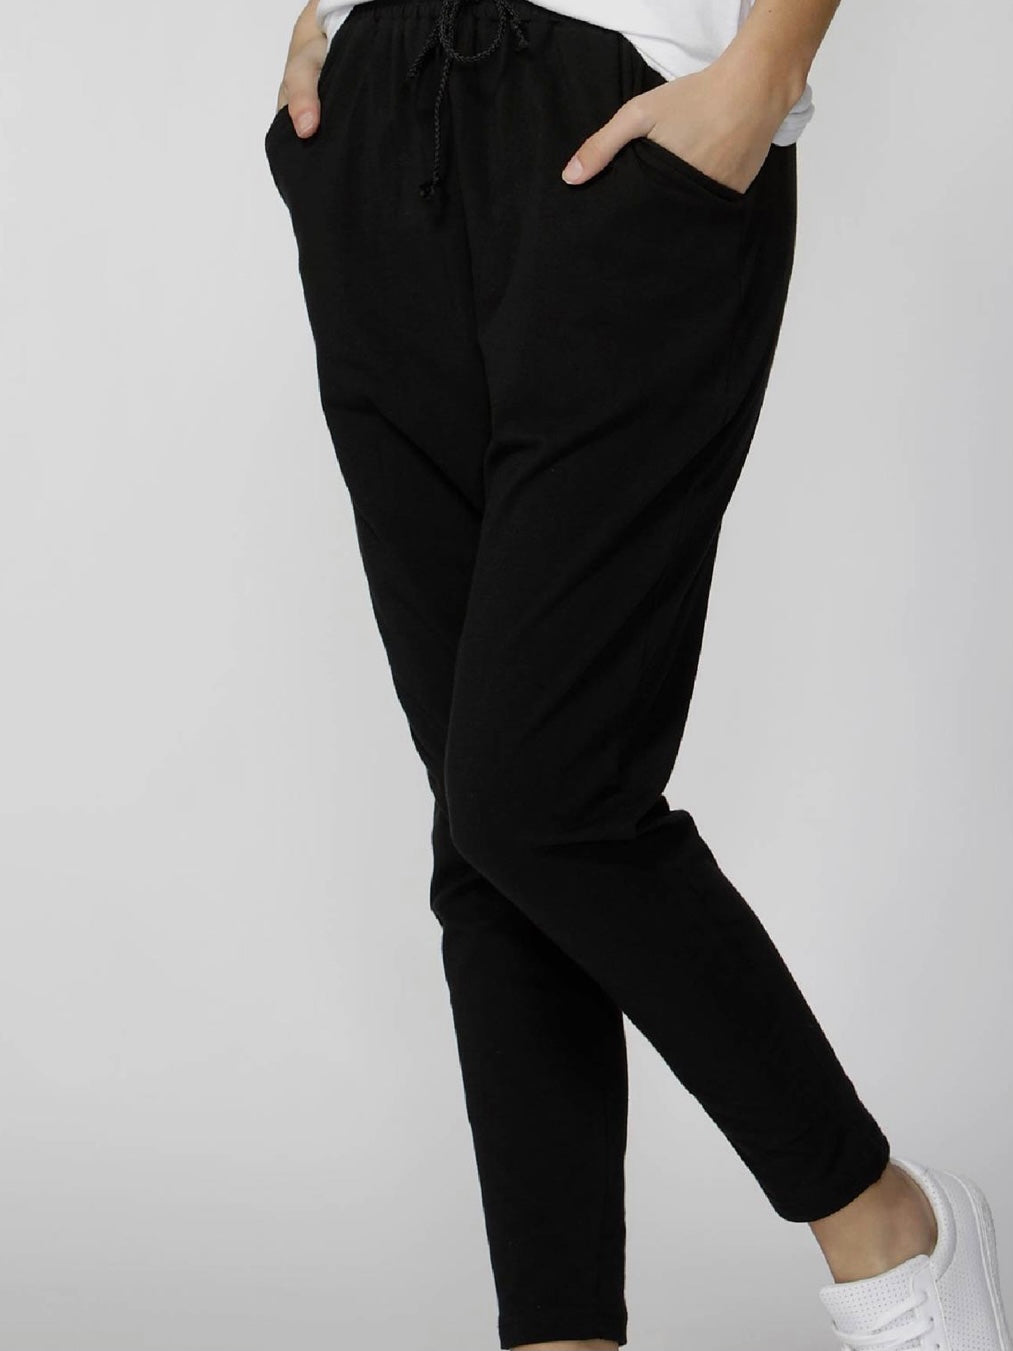 Betty Basics : Jade Relaxed Fit Pant : Black